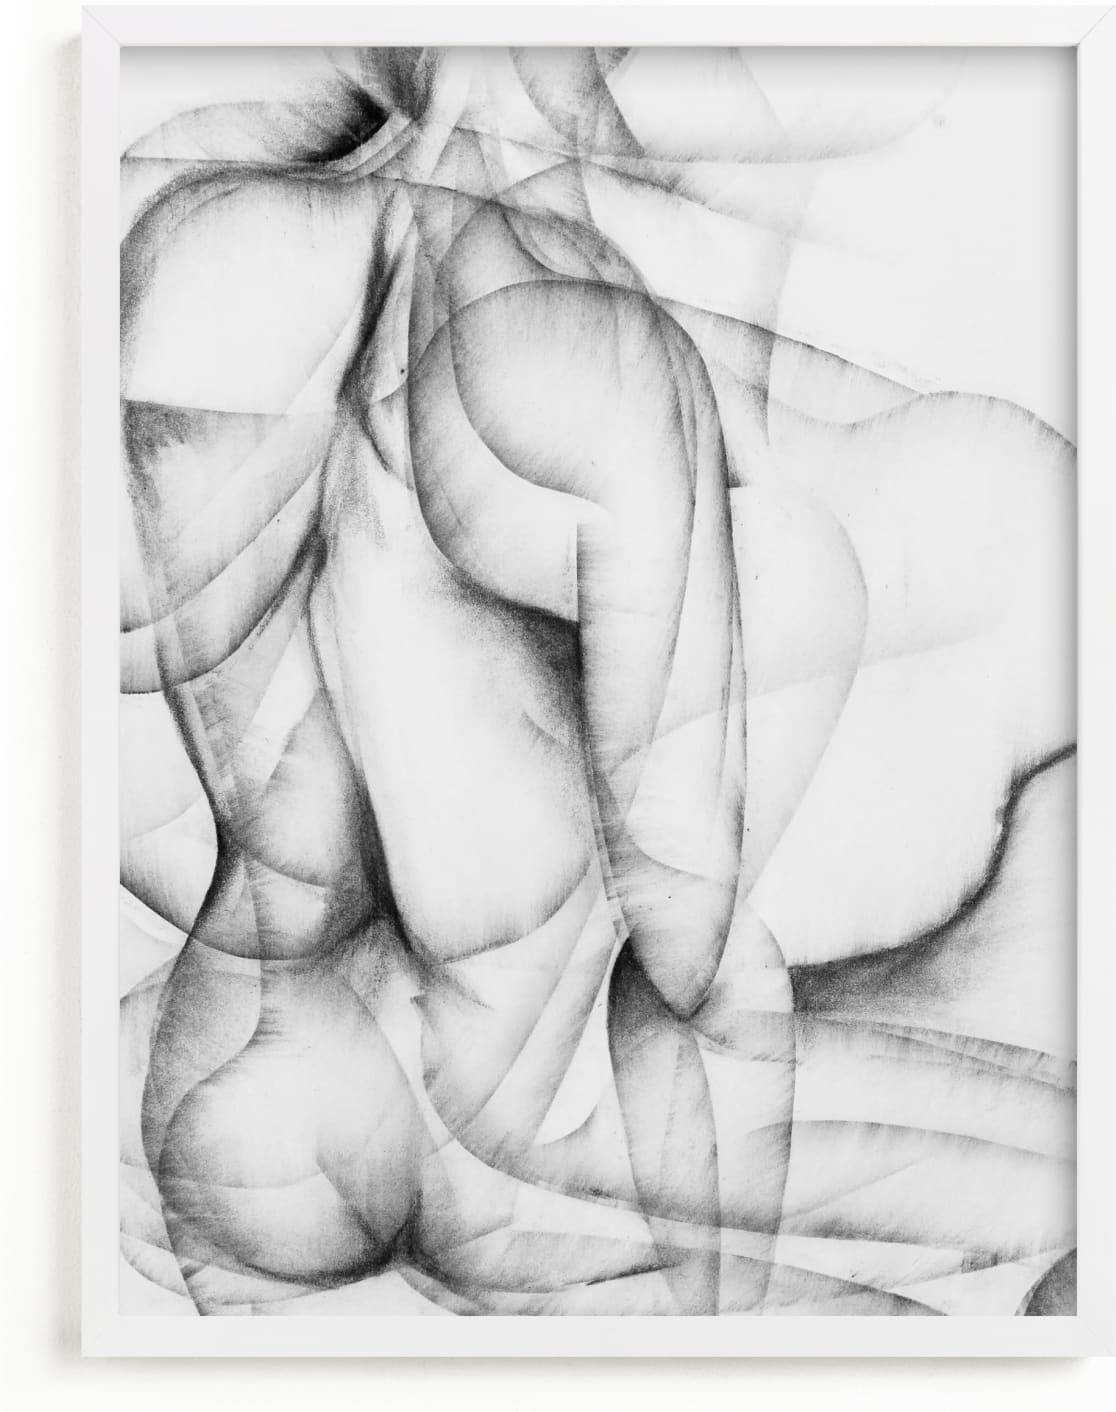 This is a black and white, grey, black art by Karen Kaul called More Alike than Not.